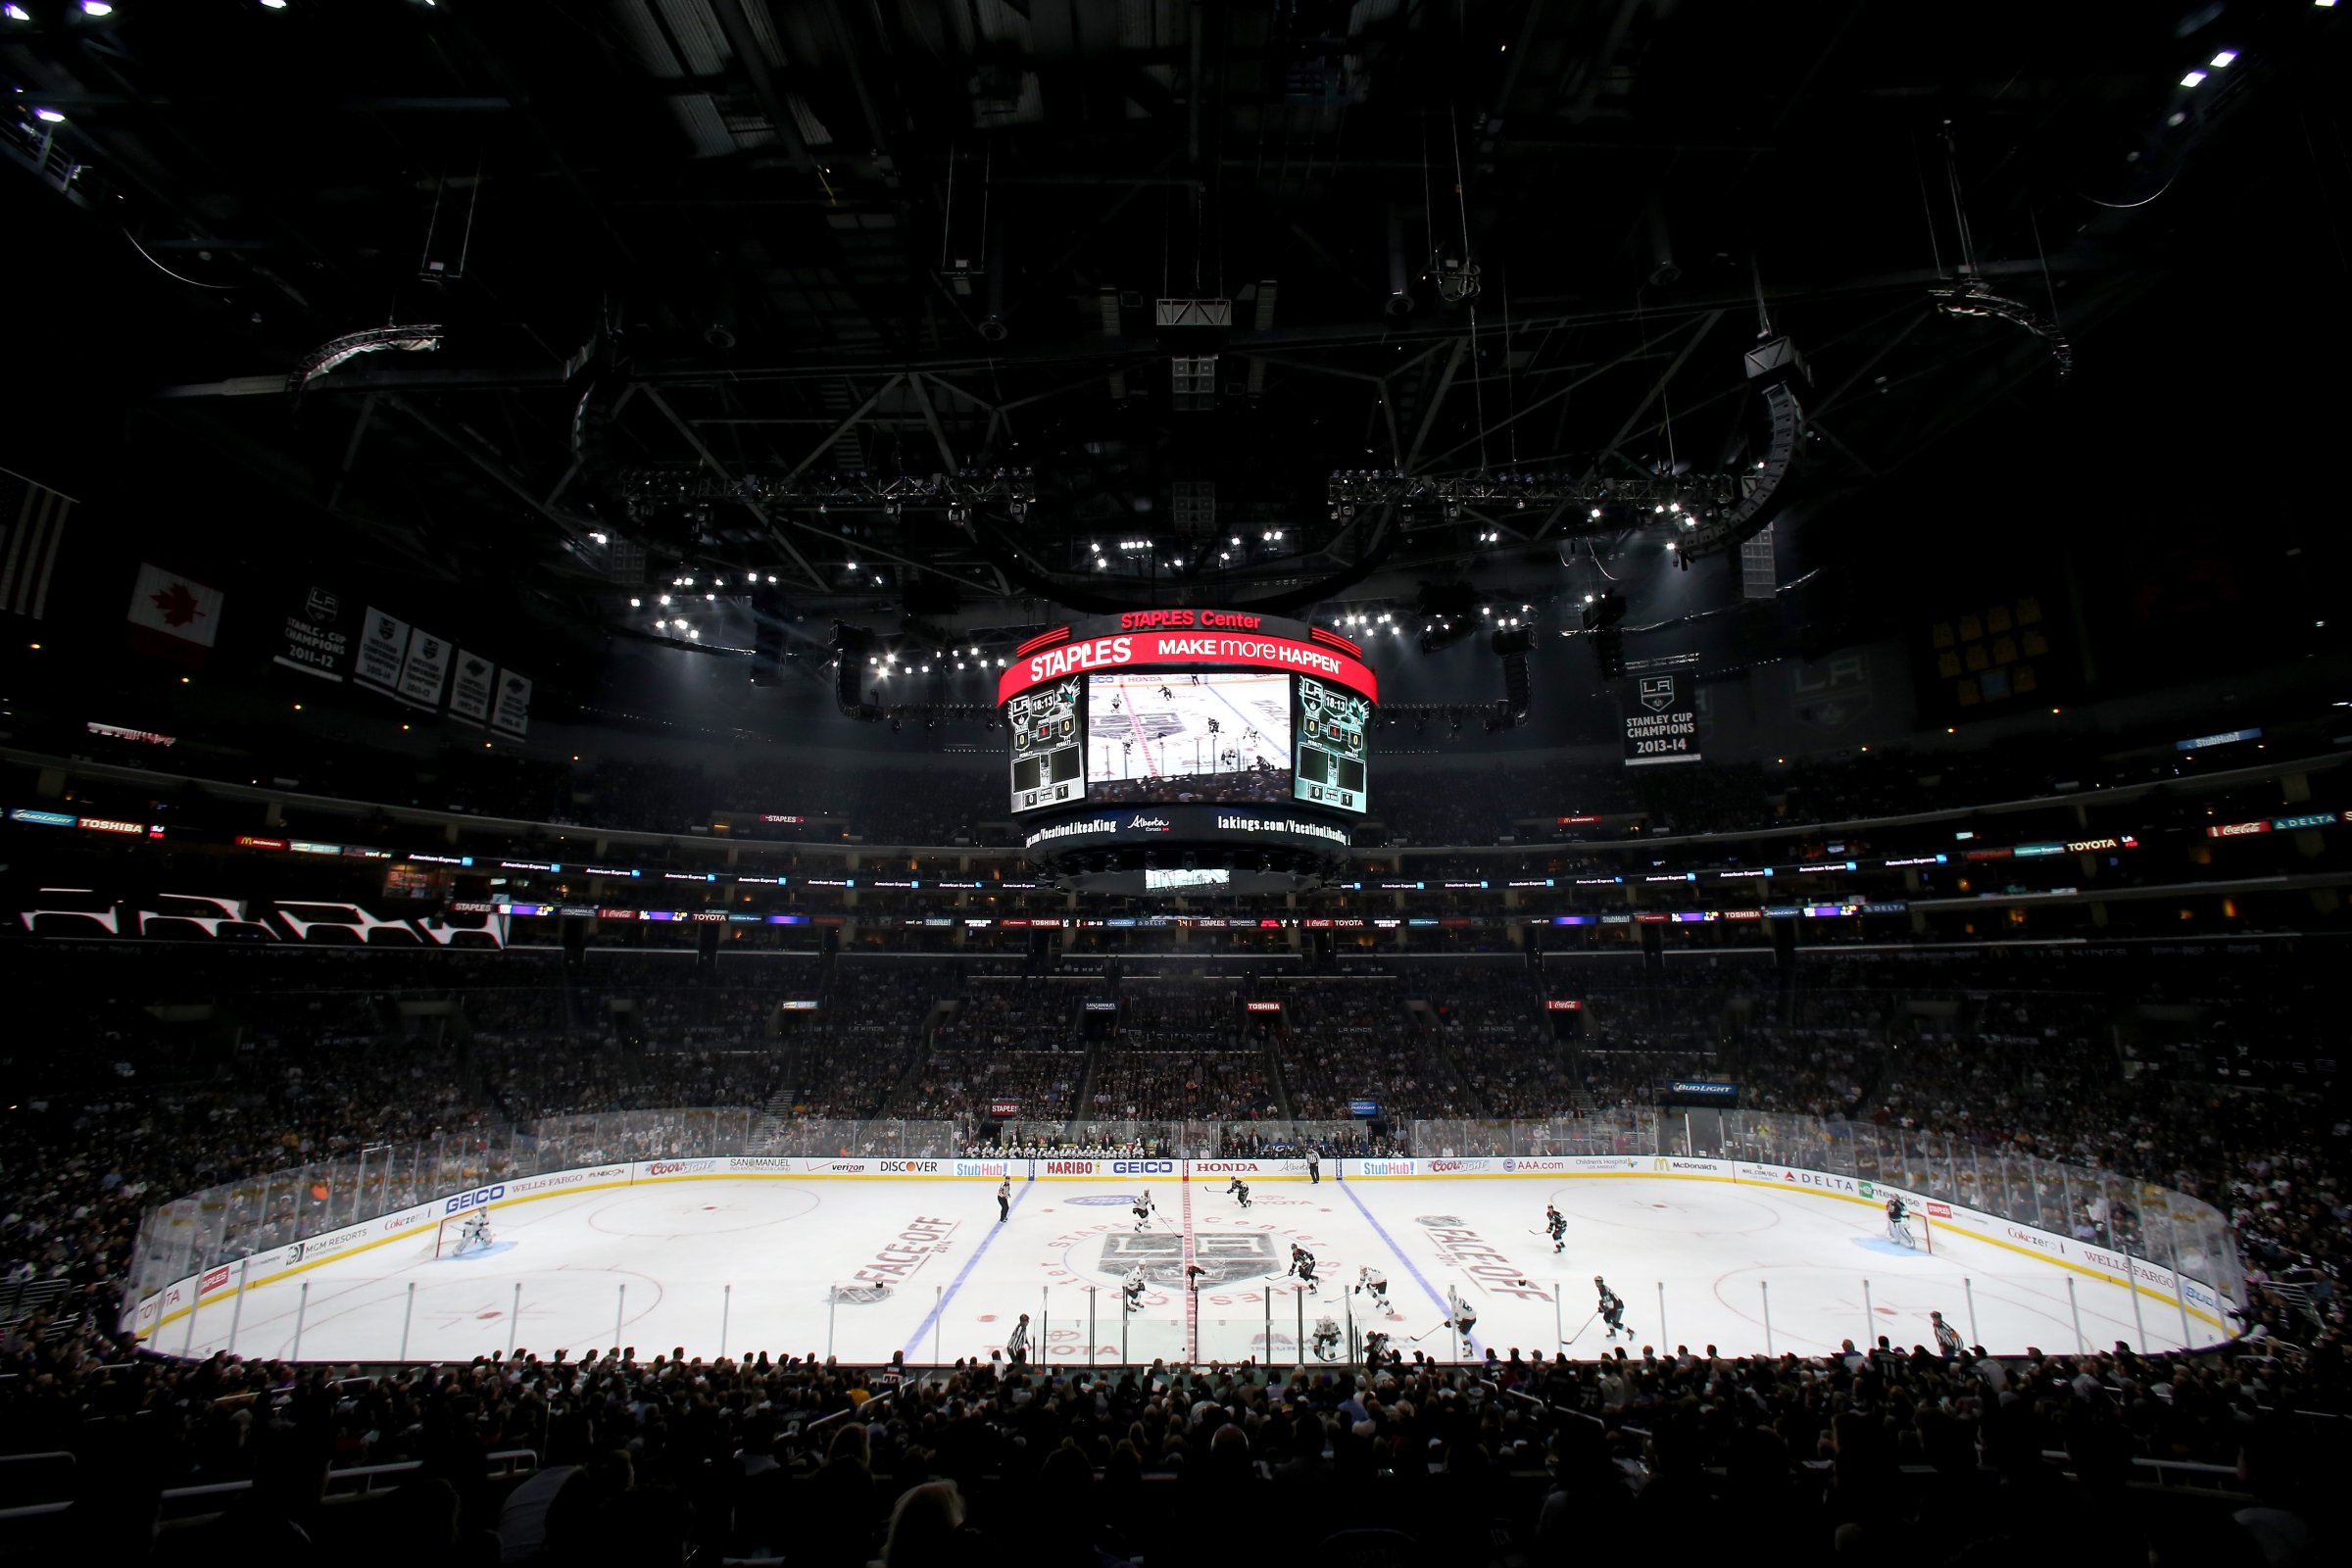 An overall view of the interior of the arena at the NHL season opener at Staples Center on October 8, 2014 in Los Angeles, California.